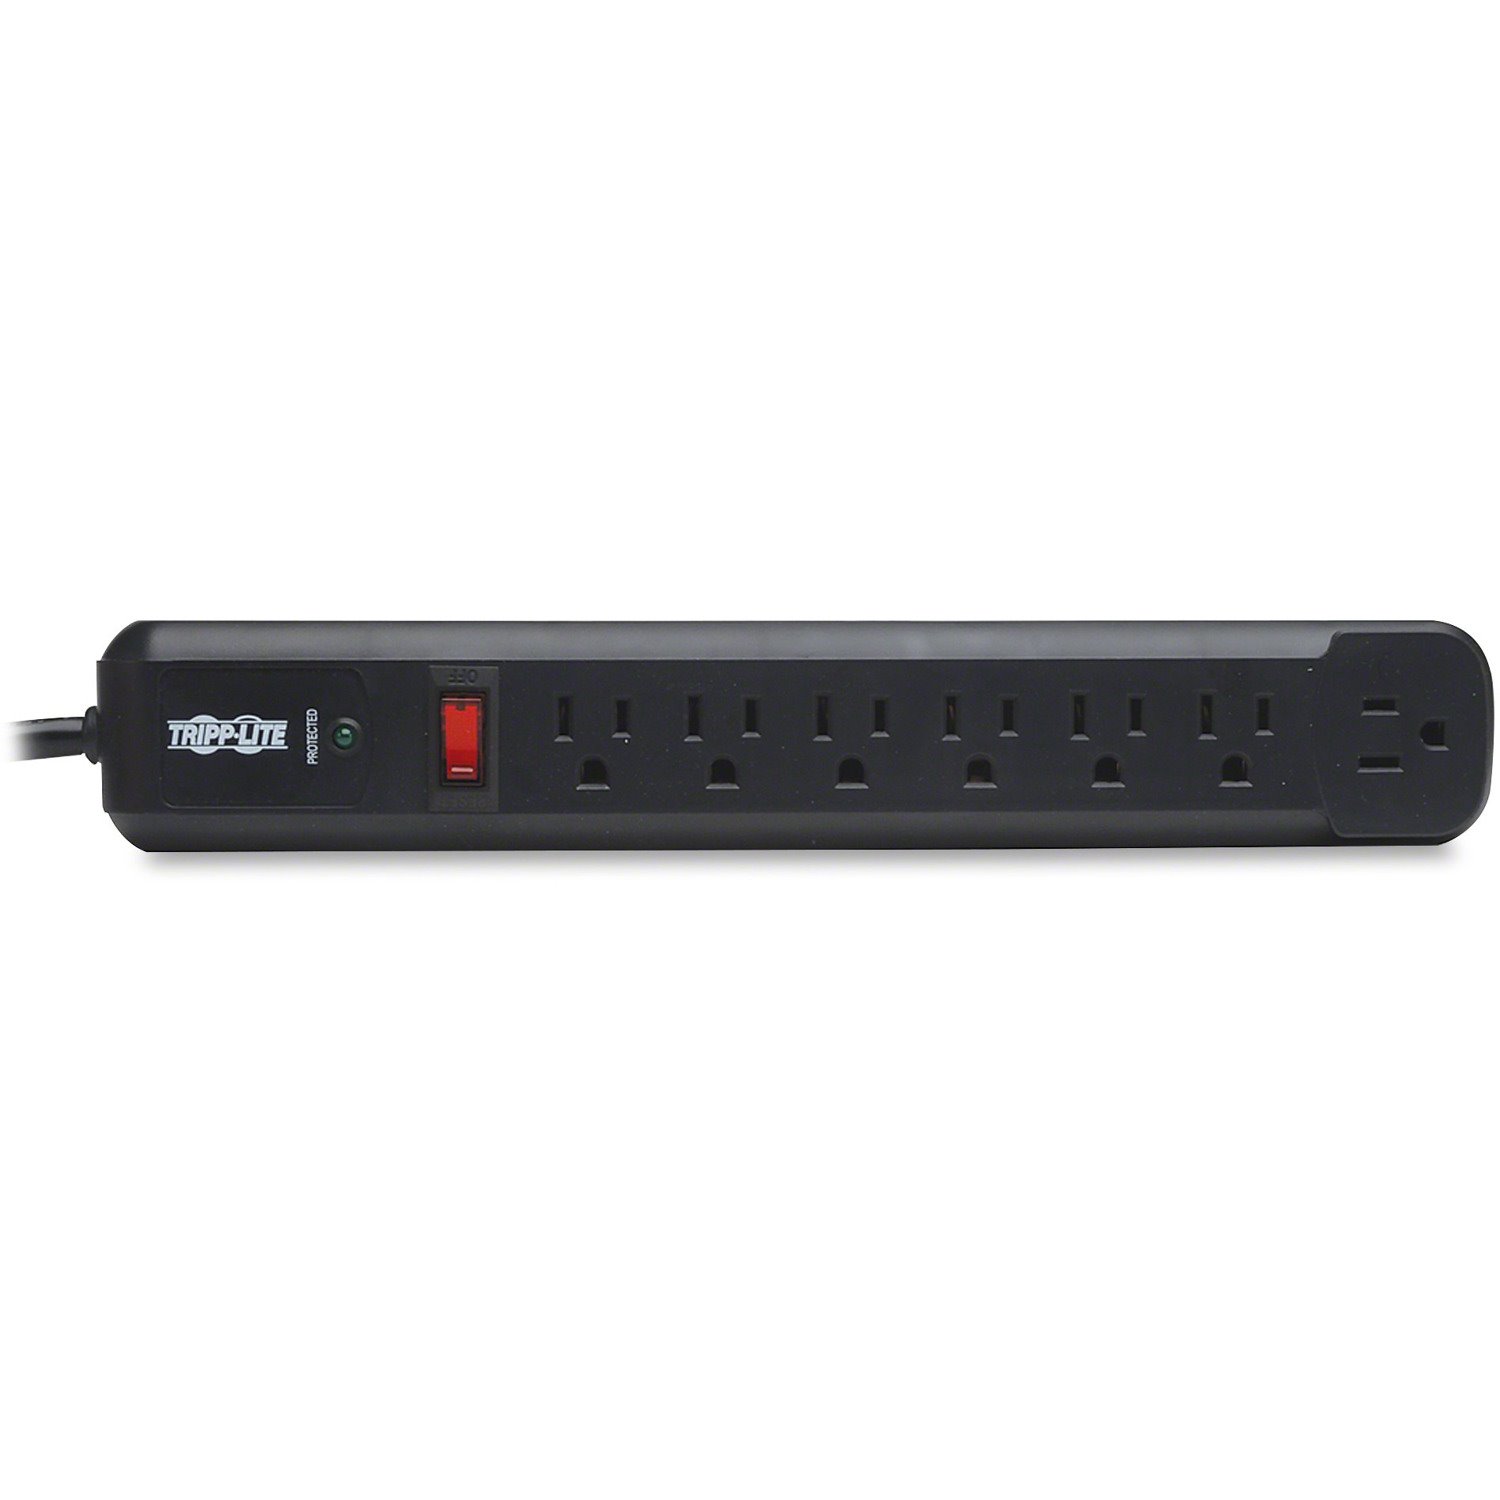 Eaton Tripp Lite Series Protect It! 7-Outlet Surge Protector, 6 Right-Angle Outlets, 4 ft. (1.22 m) Cord, 1080 Joules, Diagnostic LED, Black Housing